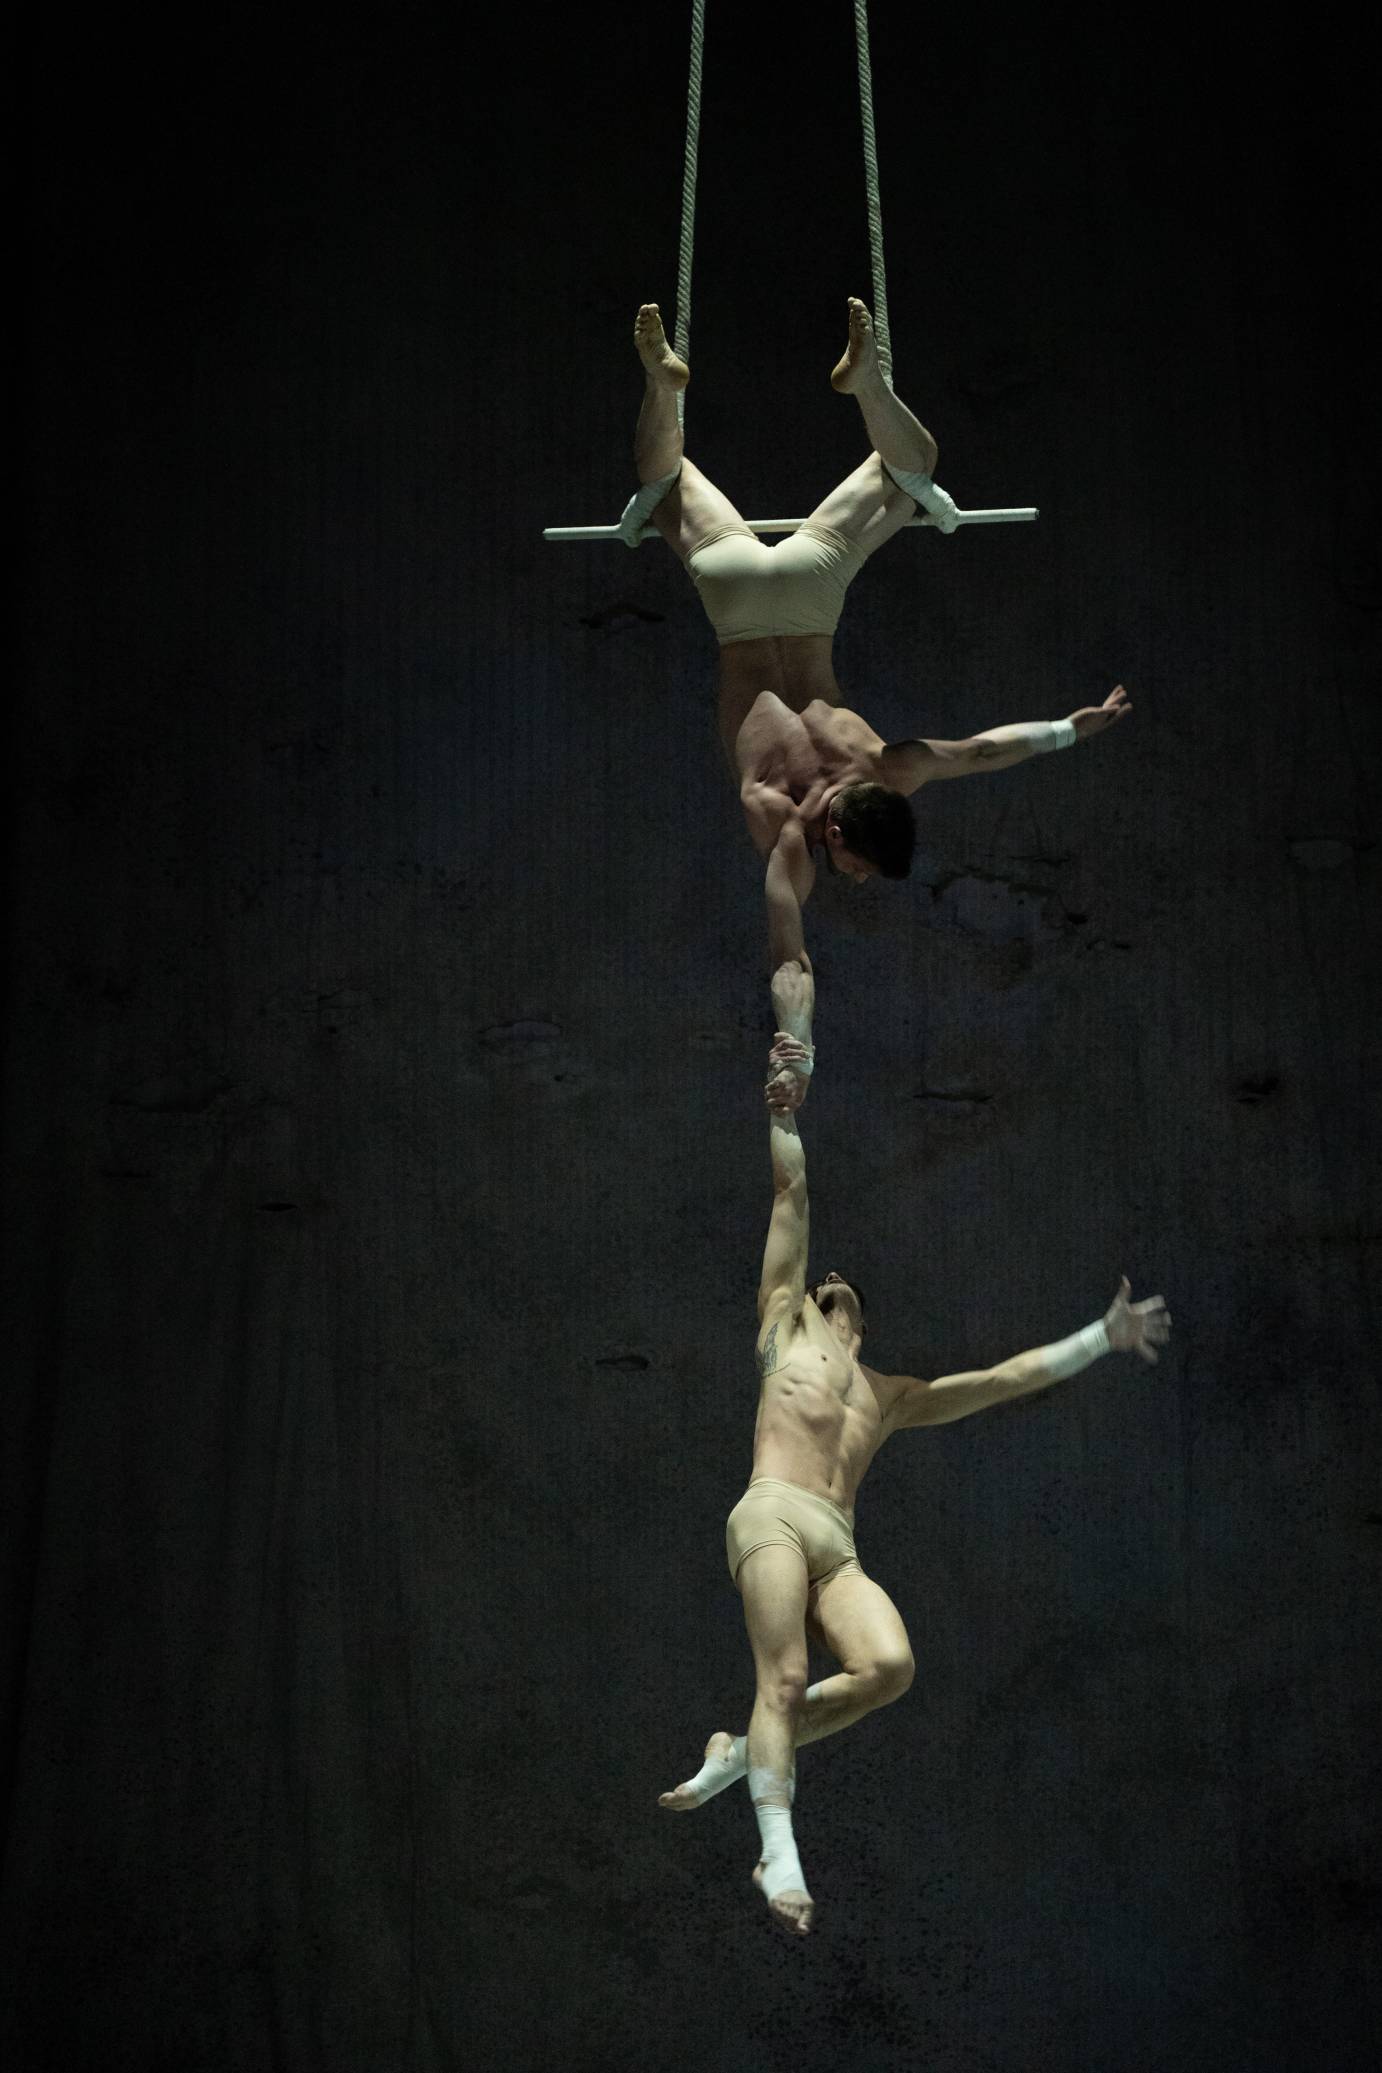 One man hangs from a trapeze holding another man with one hand